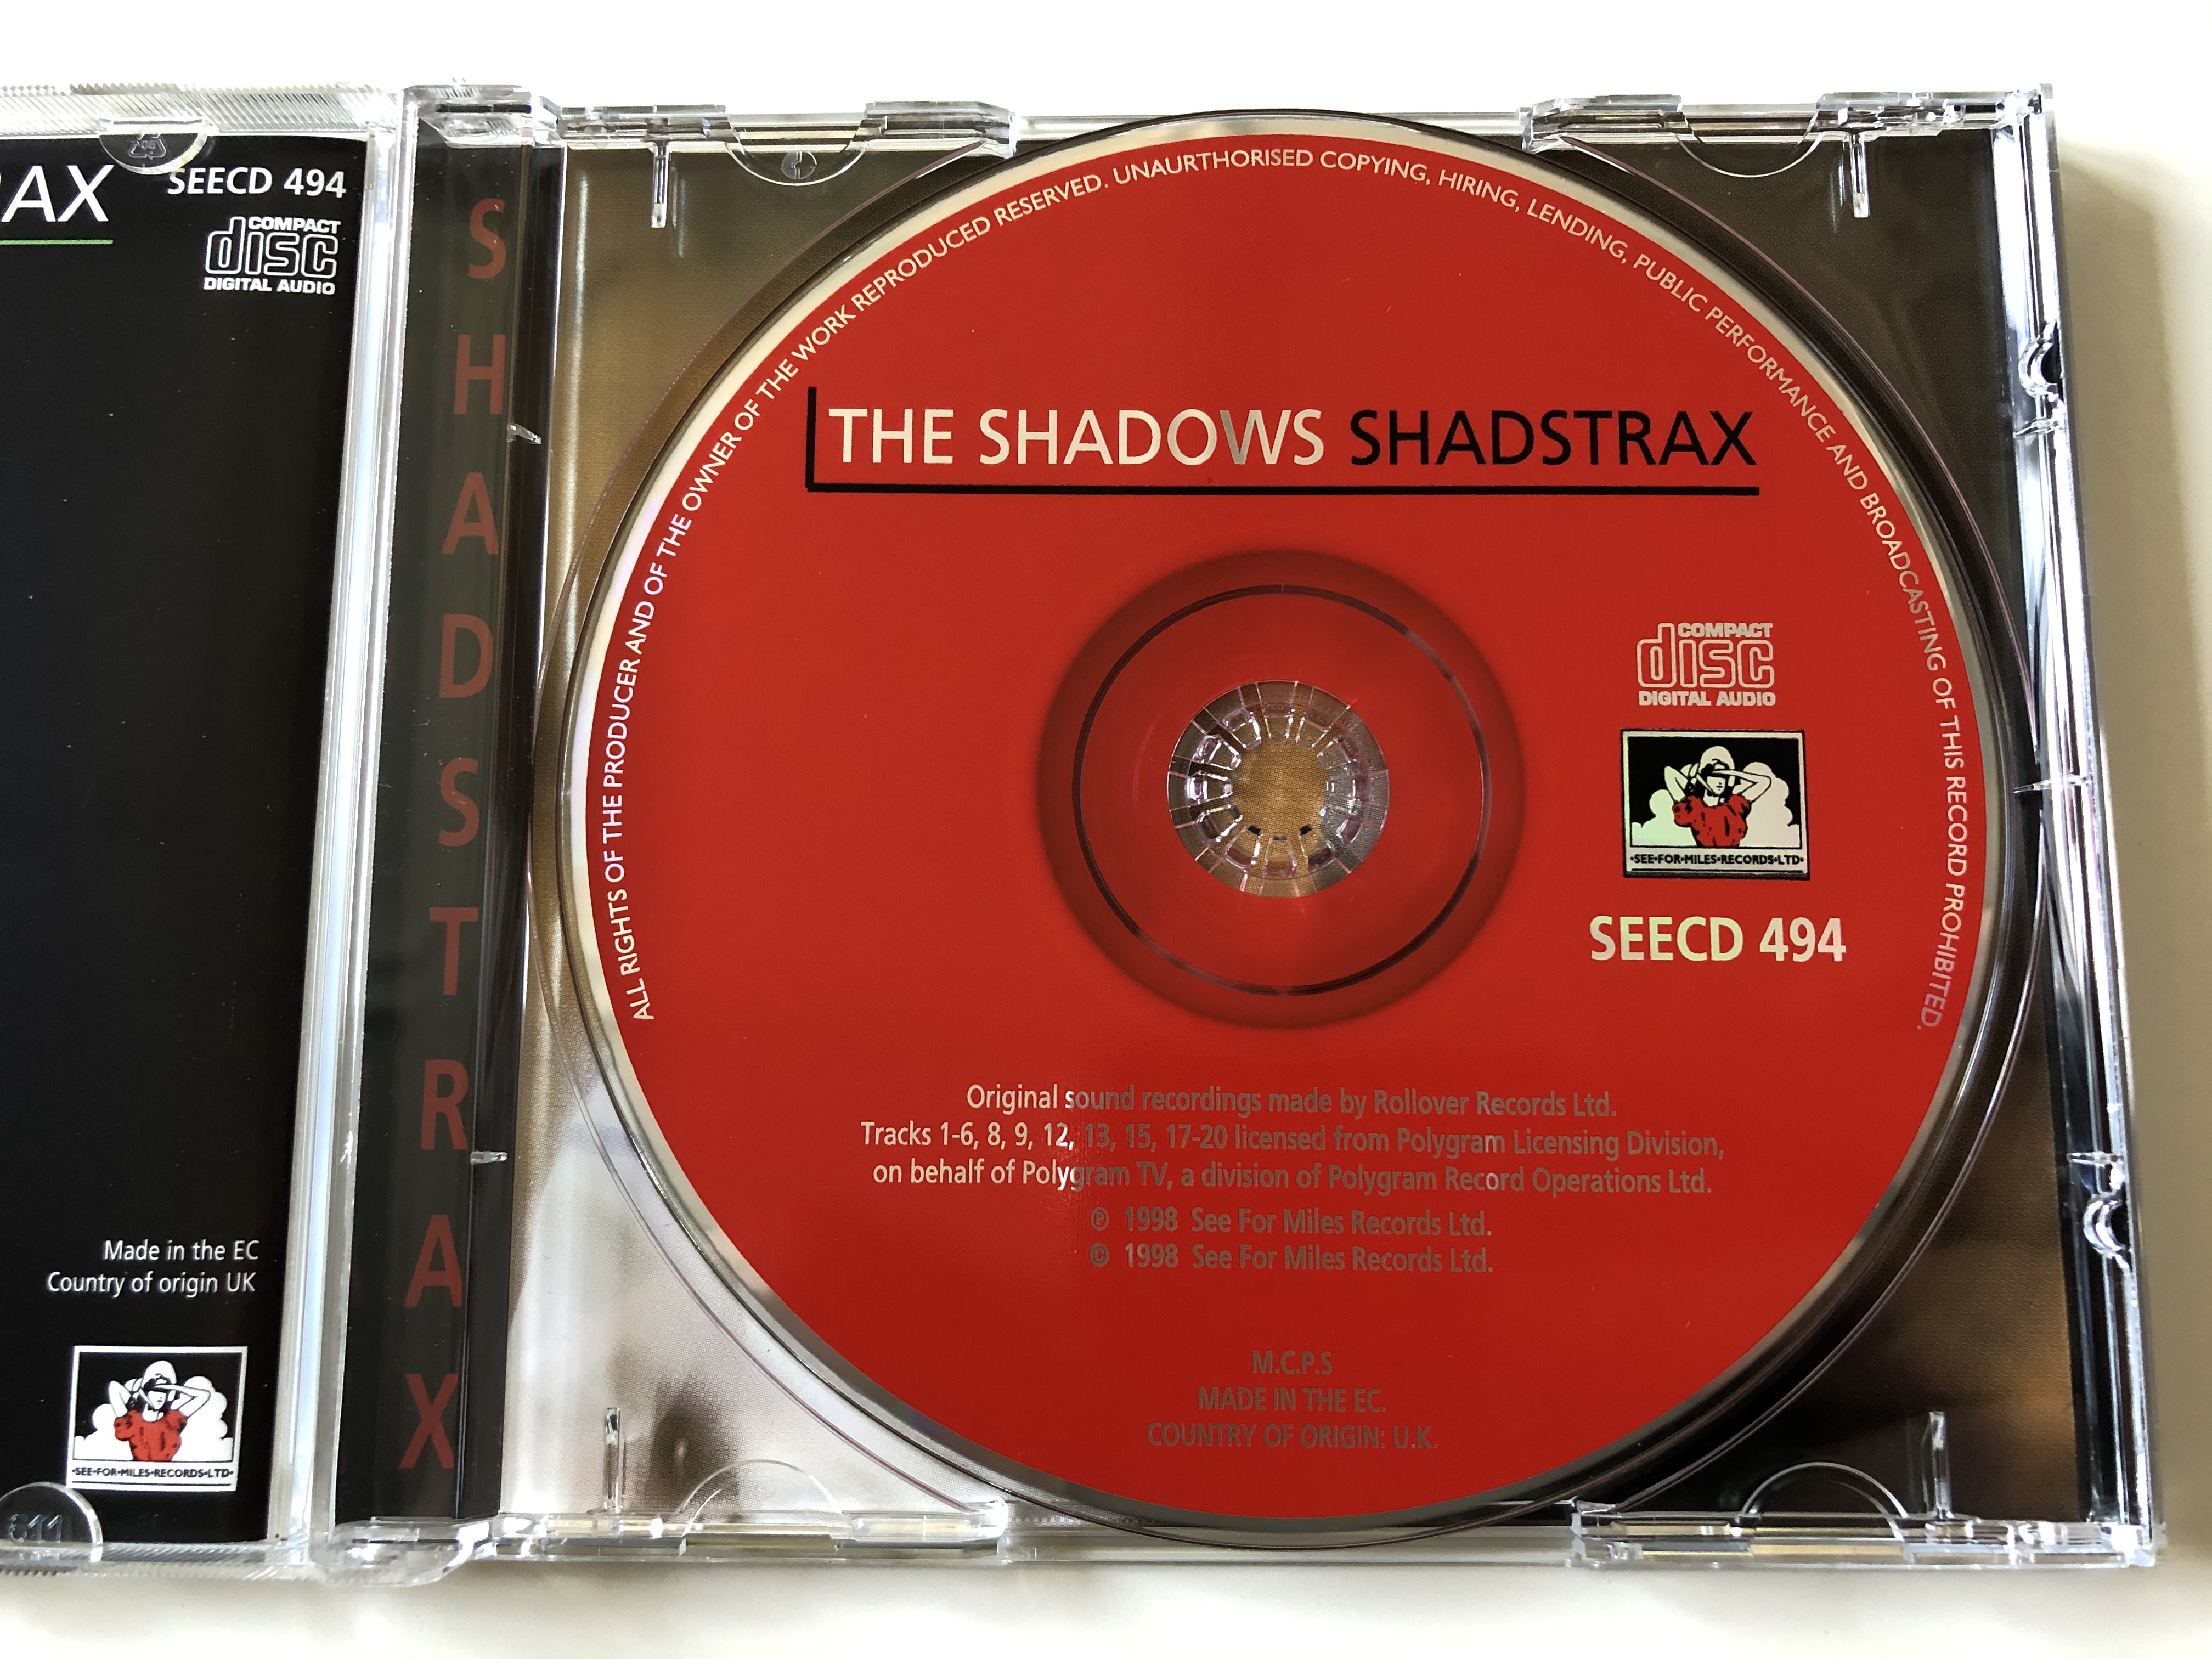 the-shadows-shadstrax-see-for-miles-records-ltd.-audio-cd-1998-seecd-494-9-.jpg